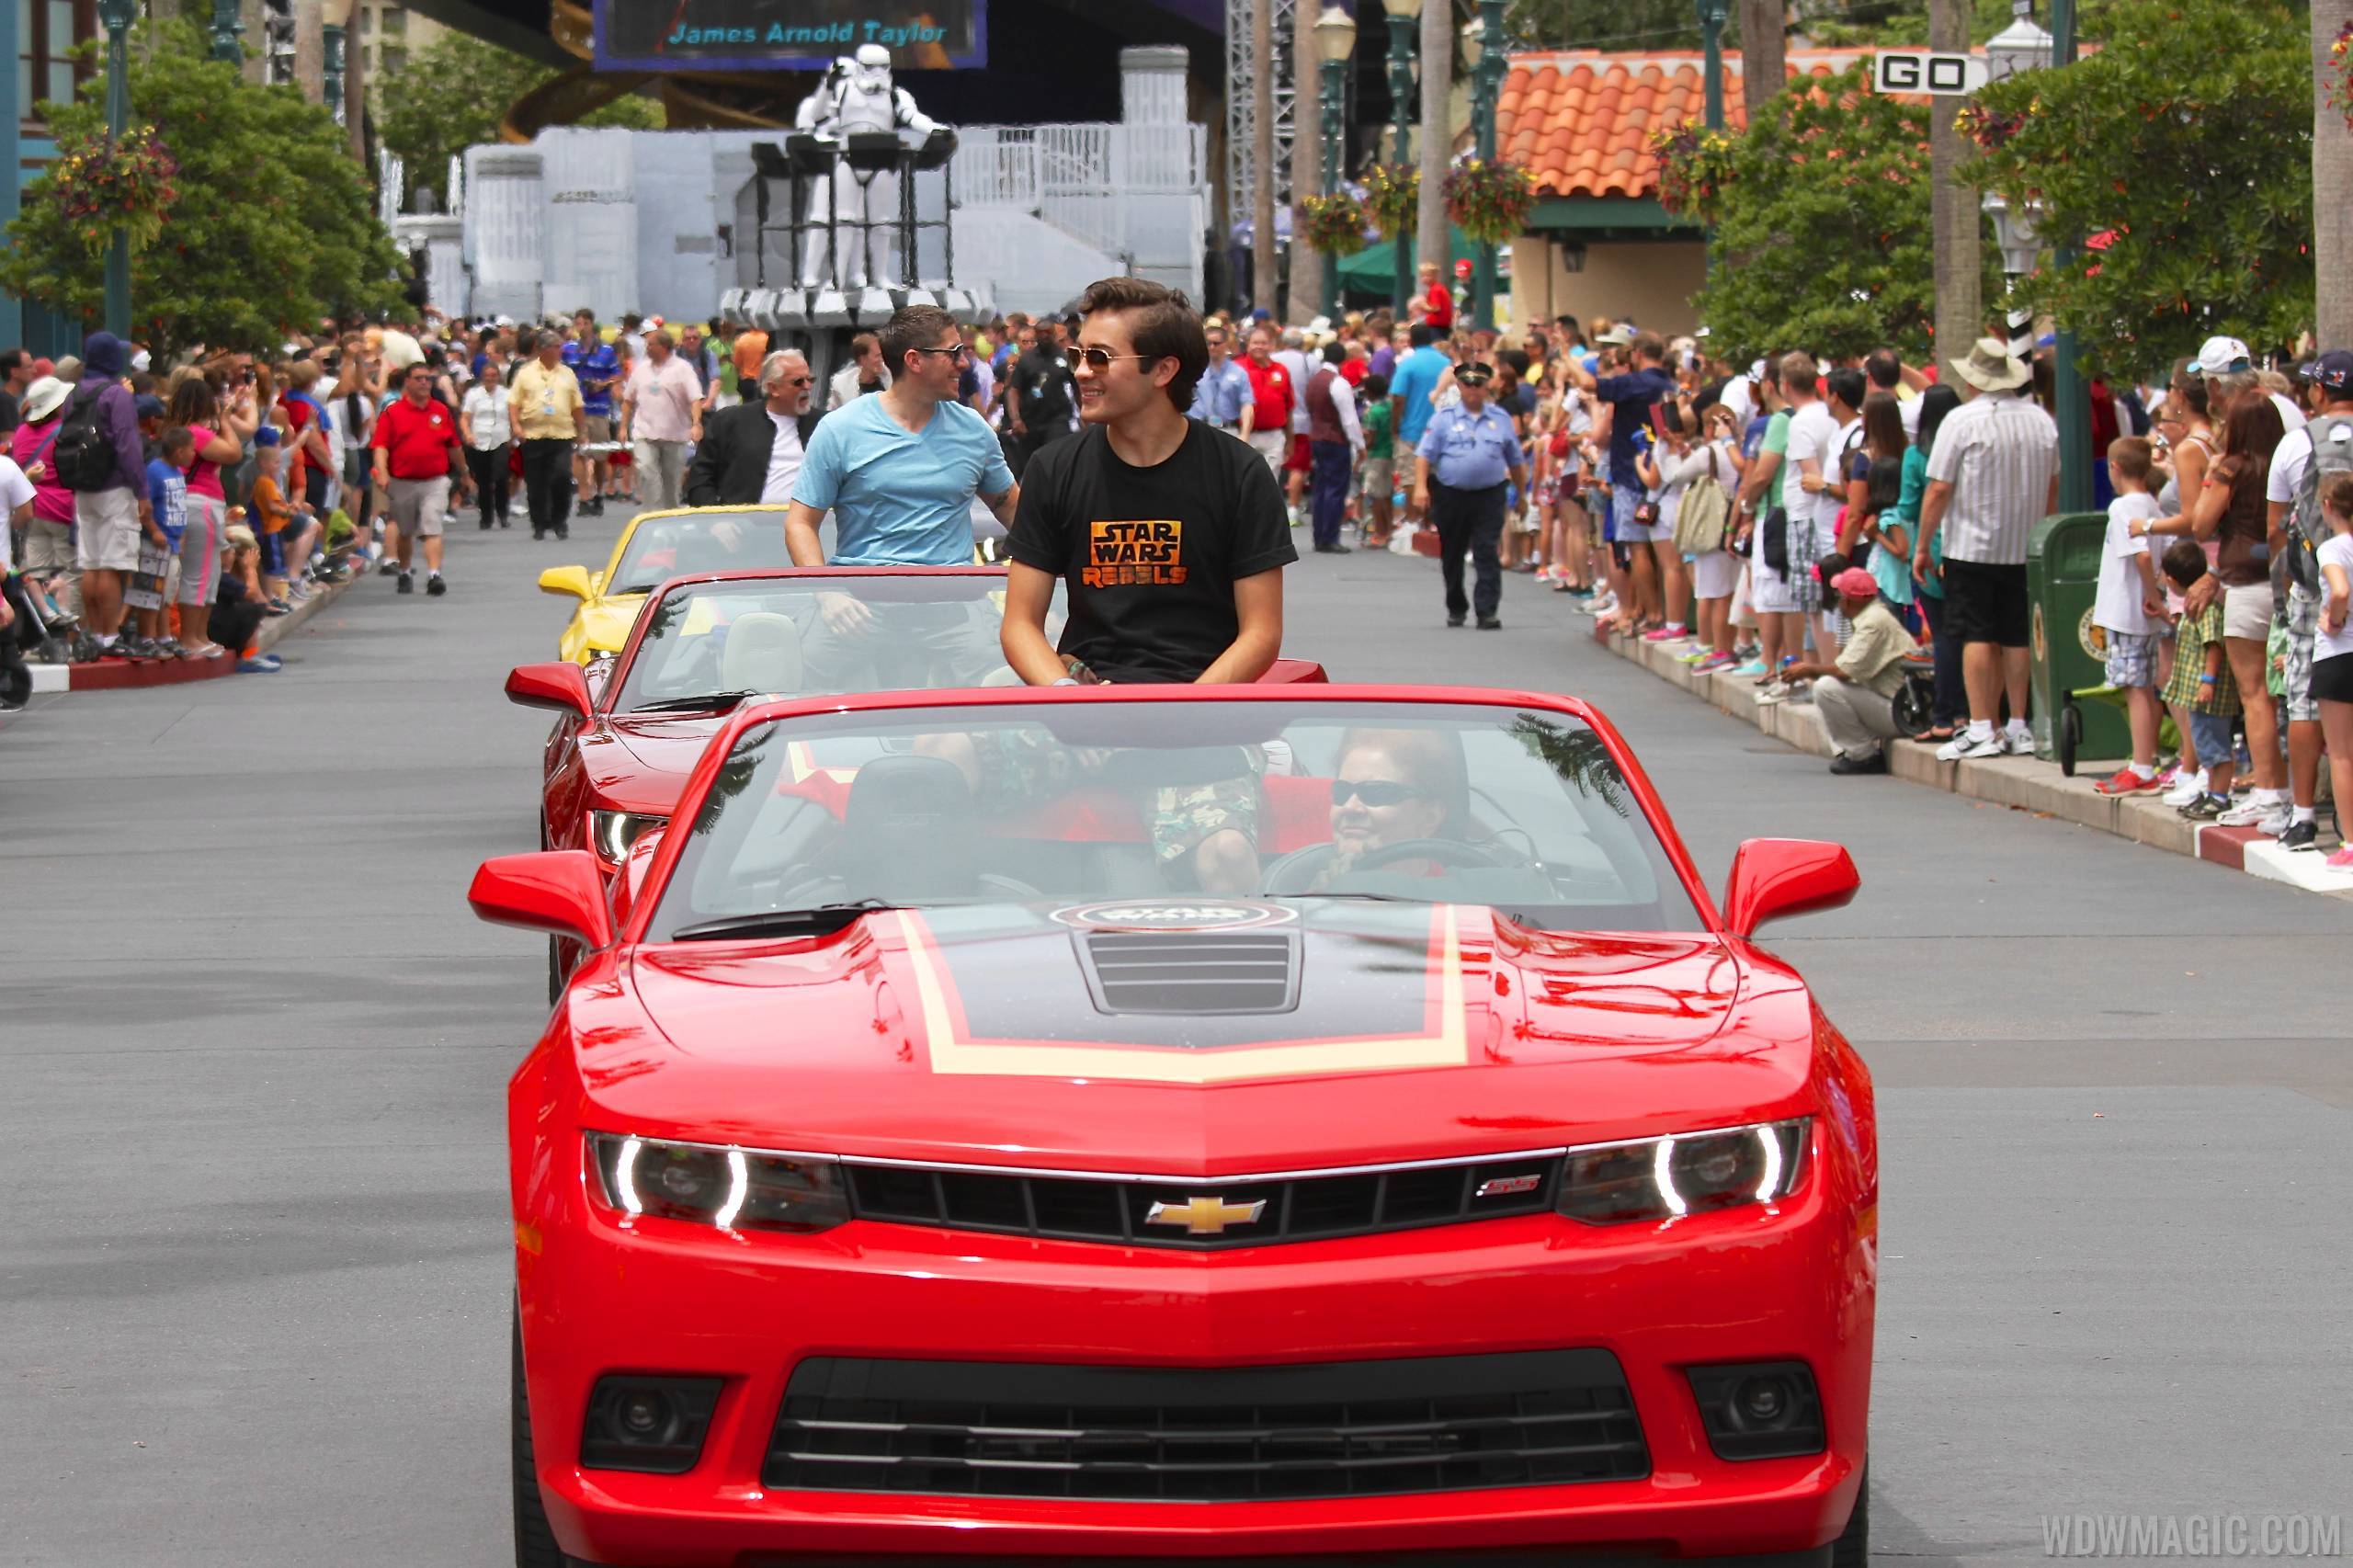 PHOTOS - 2014 Star Wars Weekends 3 Legends of the Force Motorcade celebrity guests